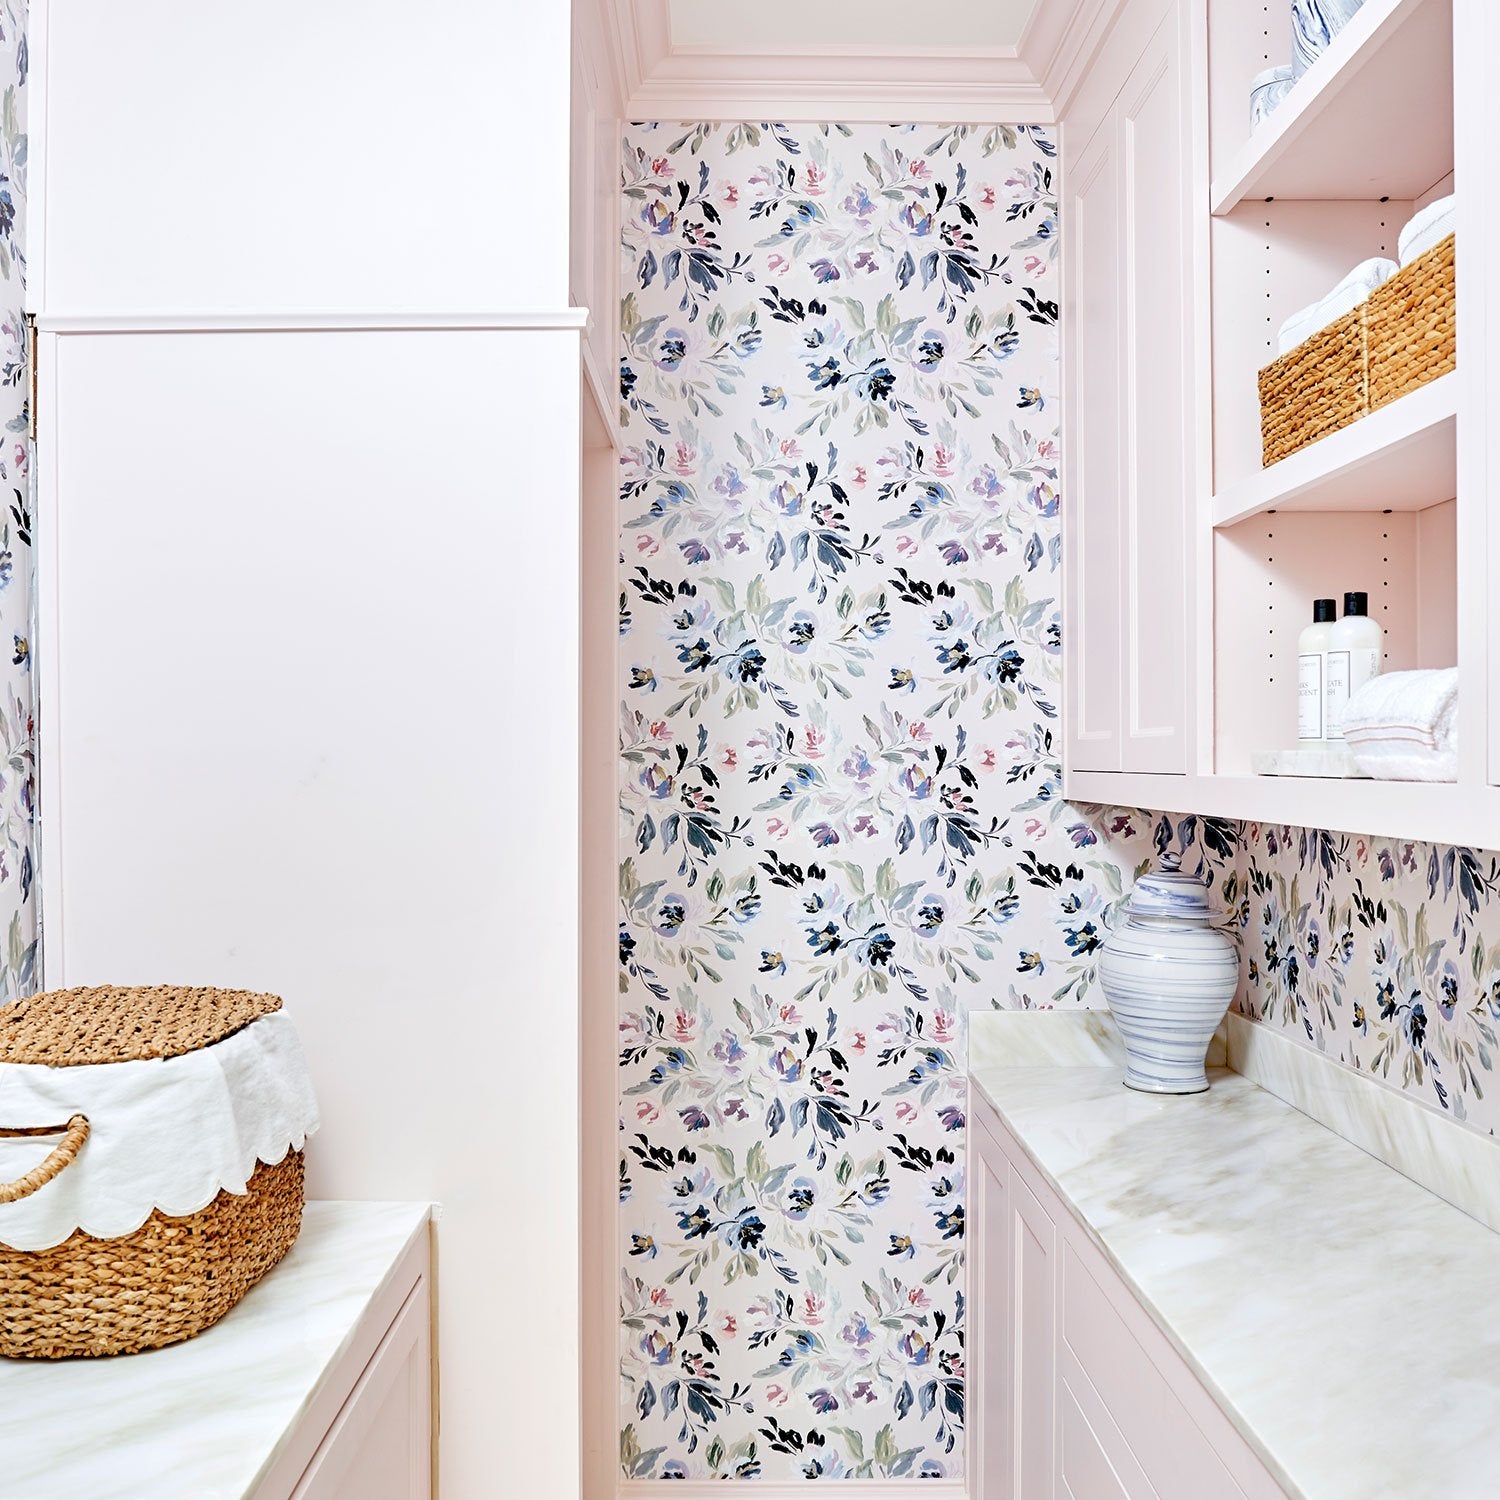 Vienna Floral Wallpaper in Laundry Room